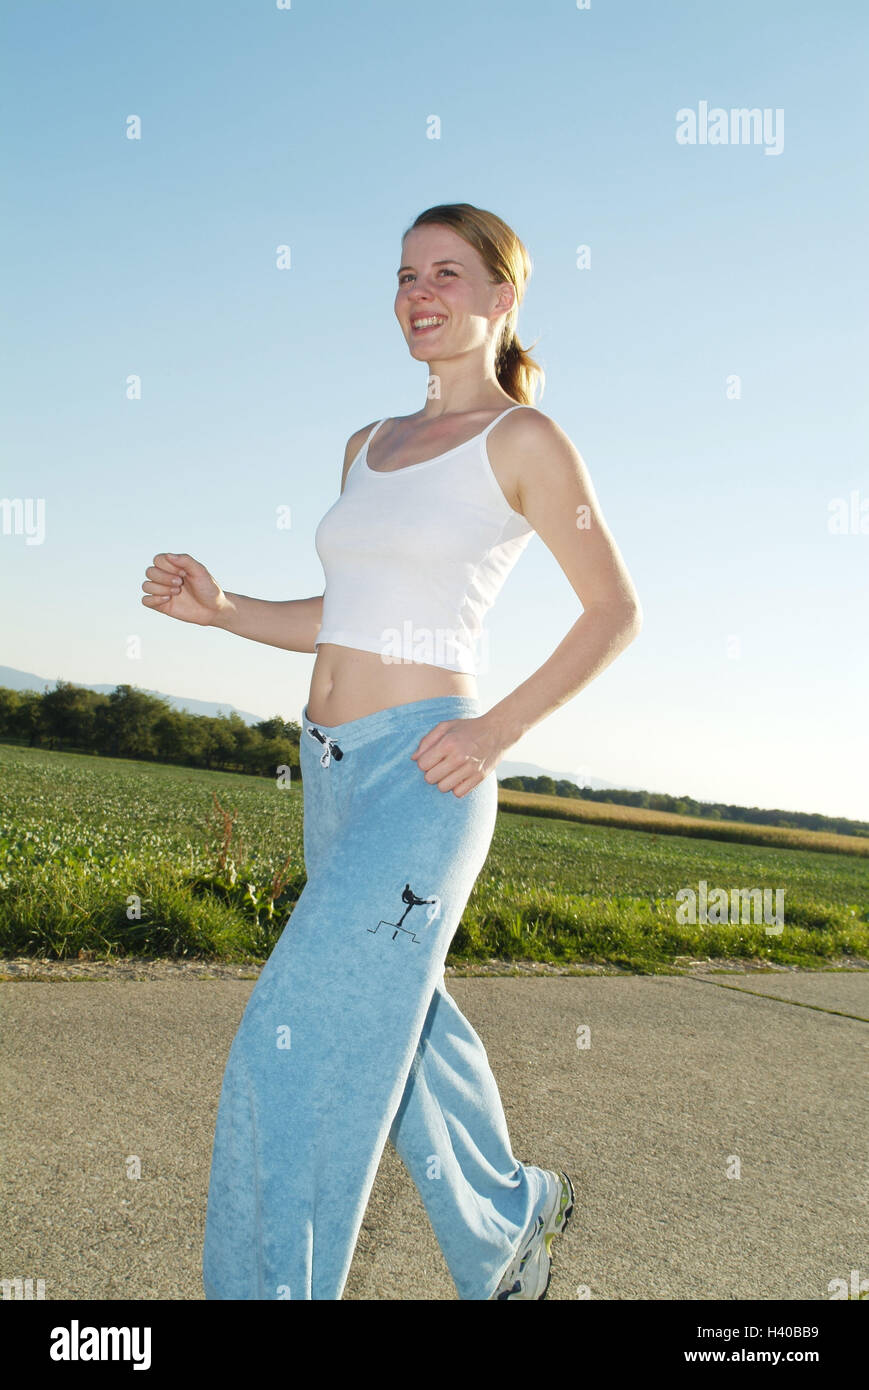 Country lane, woman, young, jog, smile side view, fields, way, young persons, 19 years, happily, smile, leisure time, hobby, sport, sportily, sportswoman, running, jogging, motion, activity, fitness, stress reduction, equaliser, enjoy, evening light, back Stock Photo